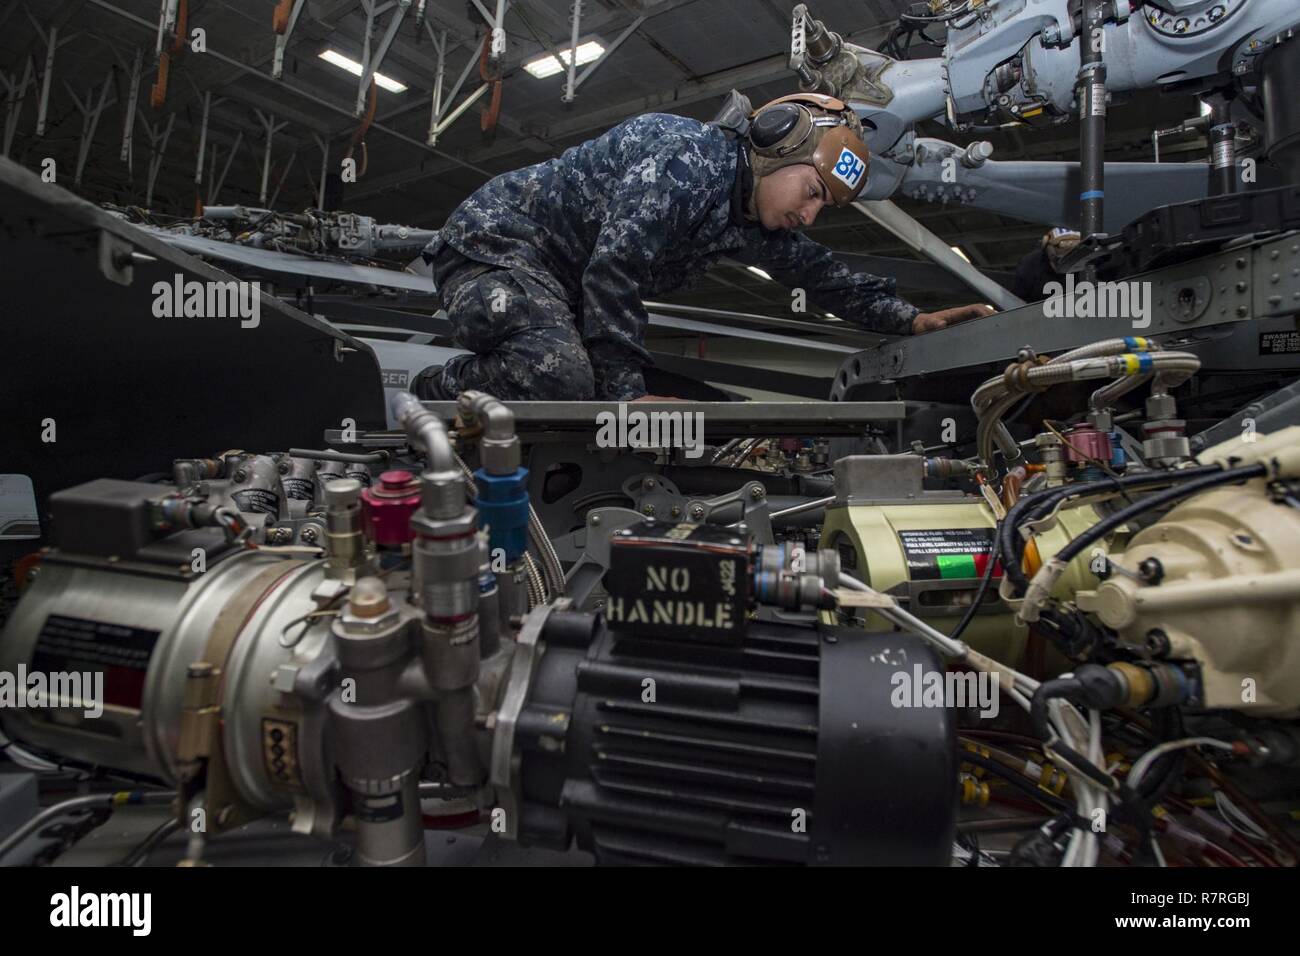 ATLANTIC OCEAN (March 30, 2017) Aviation Structural Mechanic Airman Victor Torres inspects the main rotor pilot of an MH-60R Sea Hawk helicopter assigned to the Swamp Foxes of Helicopter Maritime Strike Squadron (HSM) 74 in the hangar bay of the aircraft carrier USS Dwight D. Eisenhower (CVN 69) (Ike). Ike and its carrier strike group are underway conducting a sustainment exercise in support of the Optimized Fleet Response Plan (OFRP). Stock Photo